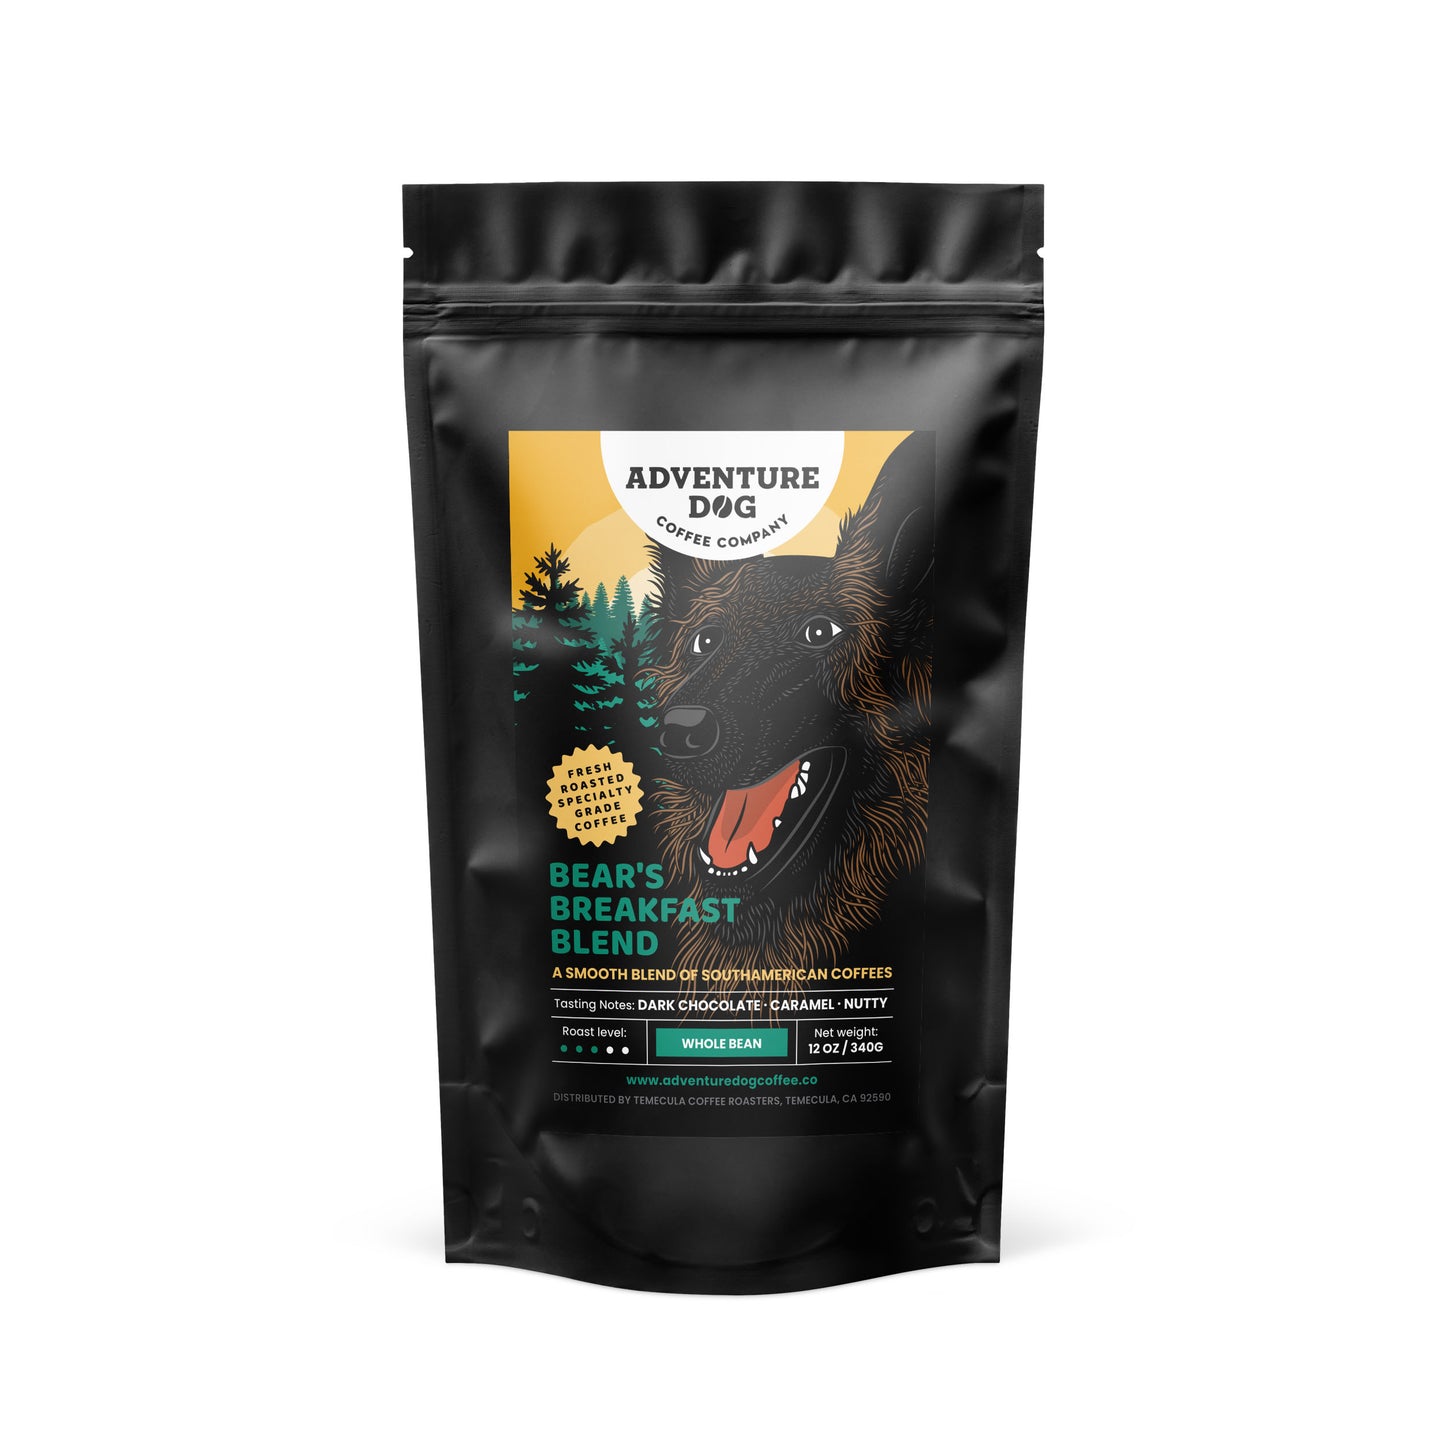 A vivacious mix of medium and dark roast coffees from Latin America, Indonesia, and Africa to achieve a complex flavor profile with notes of decadent cocoa, sweet caramel, and a hint of earthy vanilla.